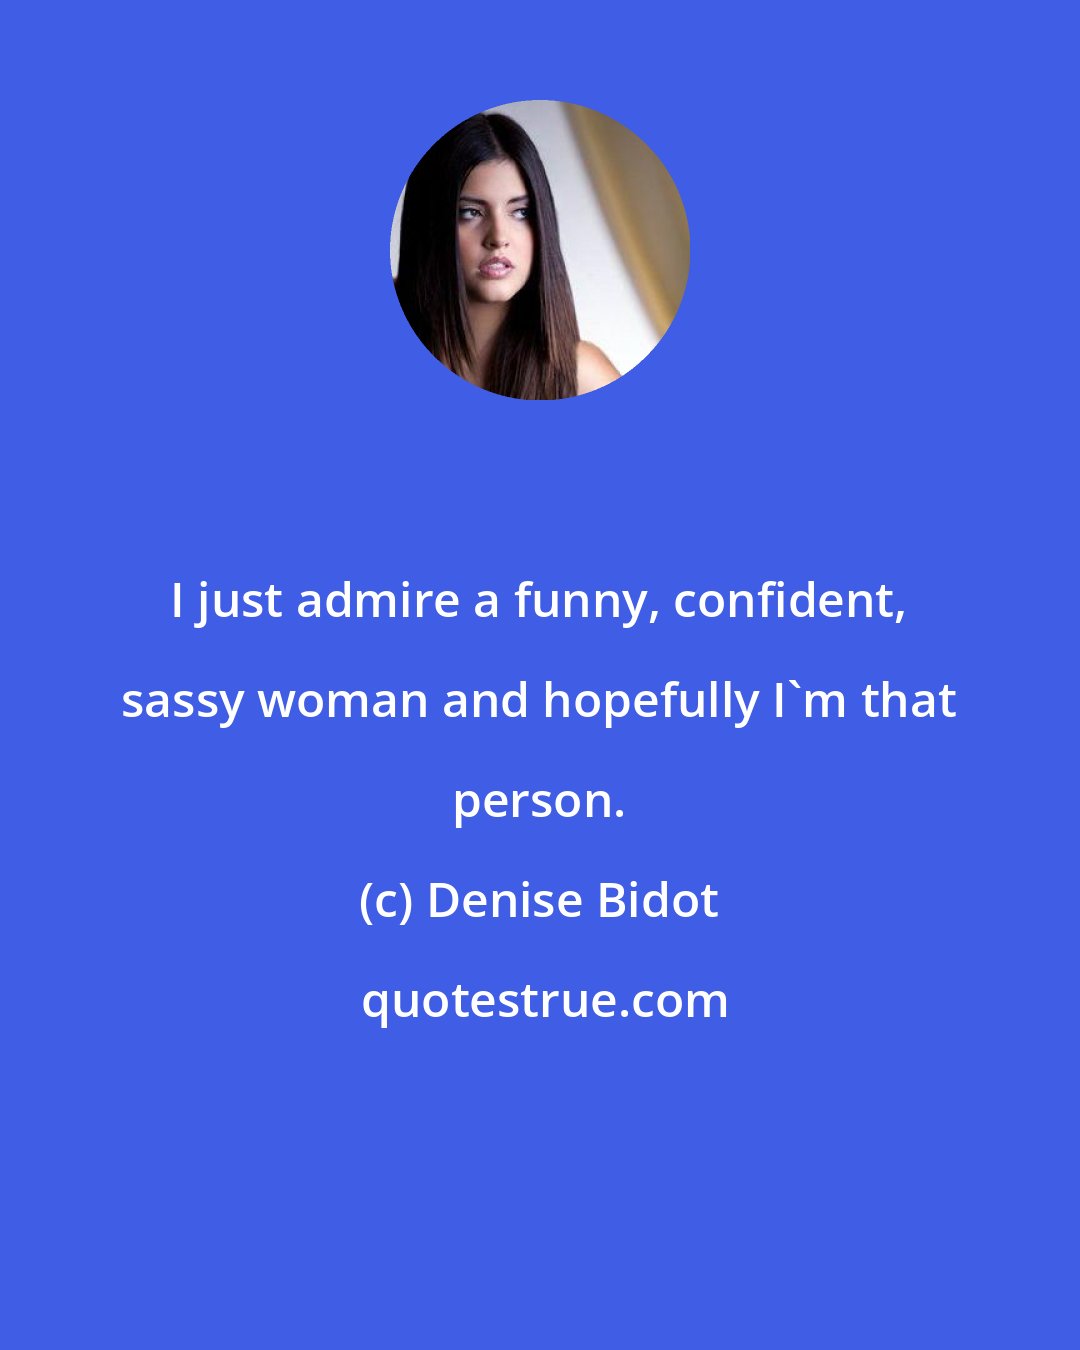 Denise Bidot: I just admire a funny, confident, sassy woman and hopefully I'm that person.